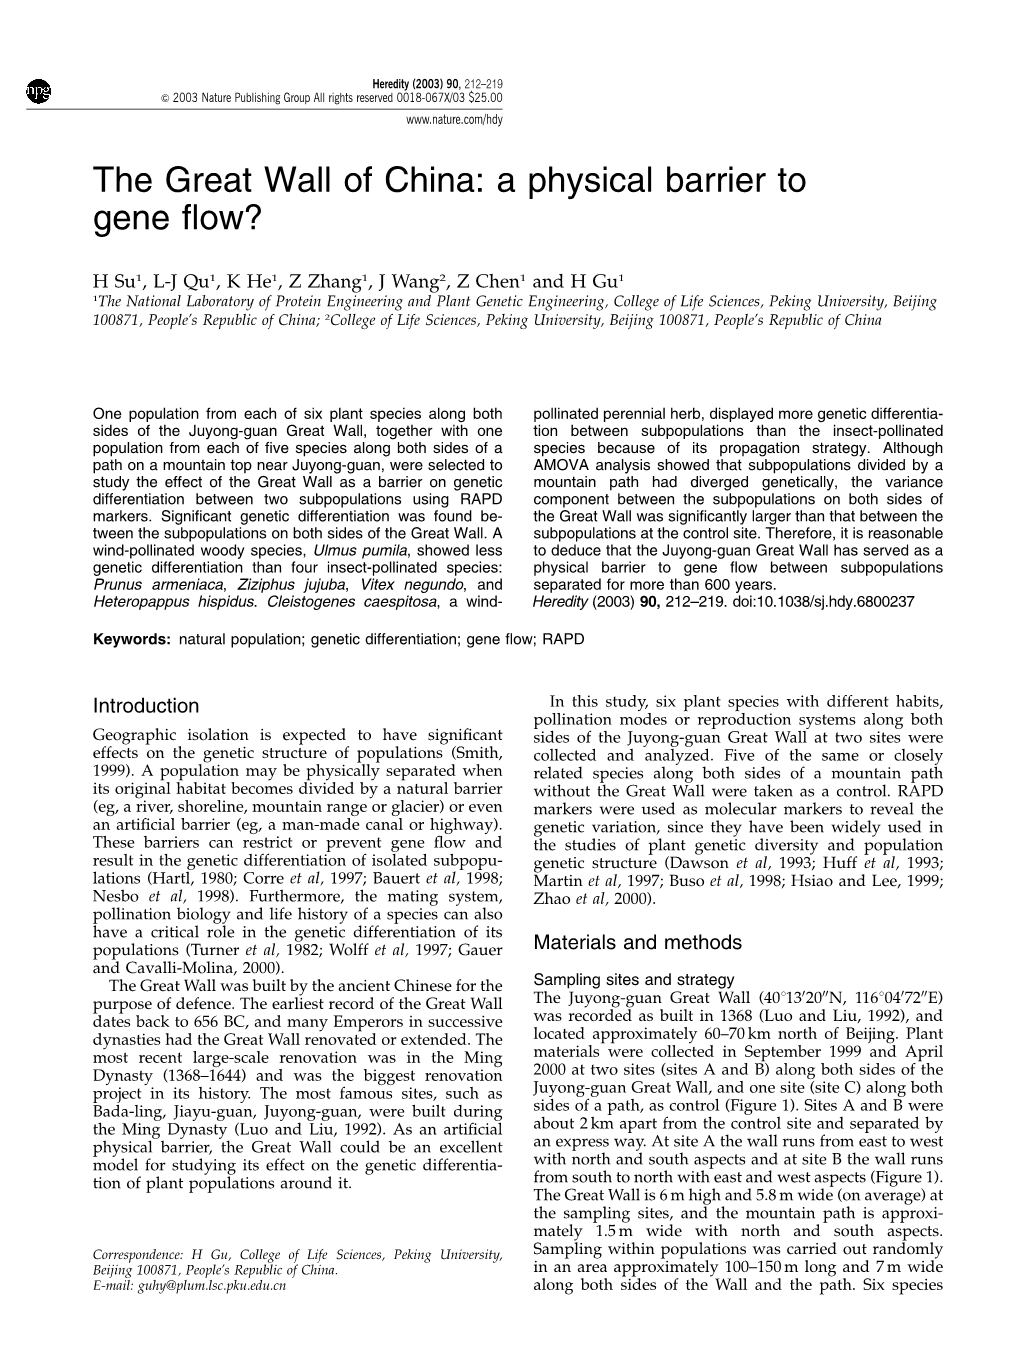 The Great Wall of China: a Physical Barrier to Gene Flow?